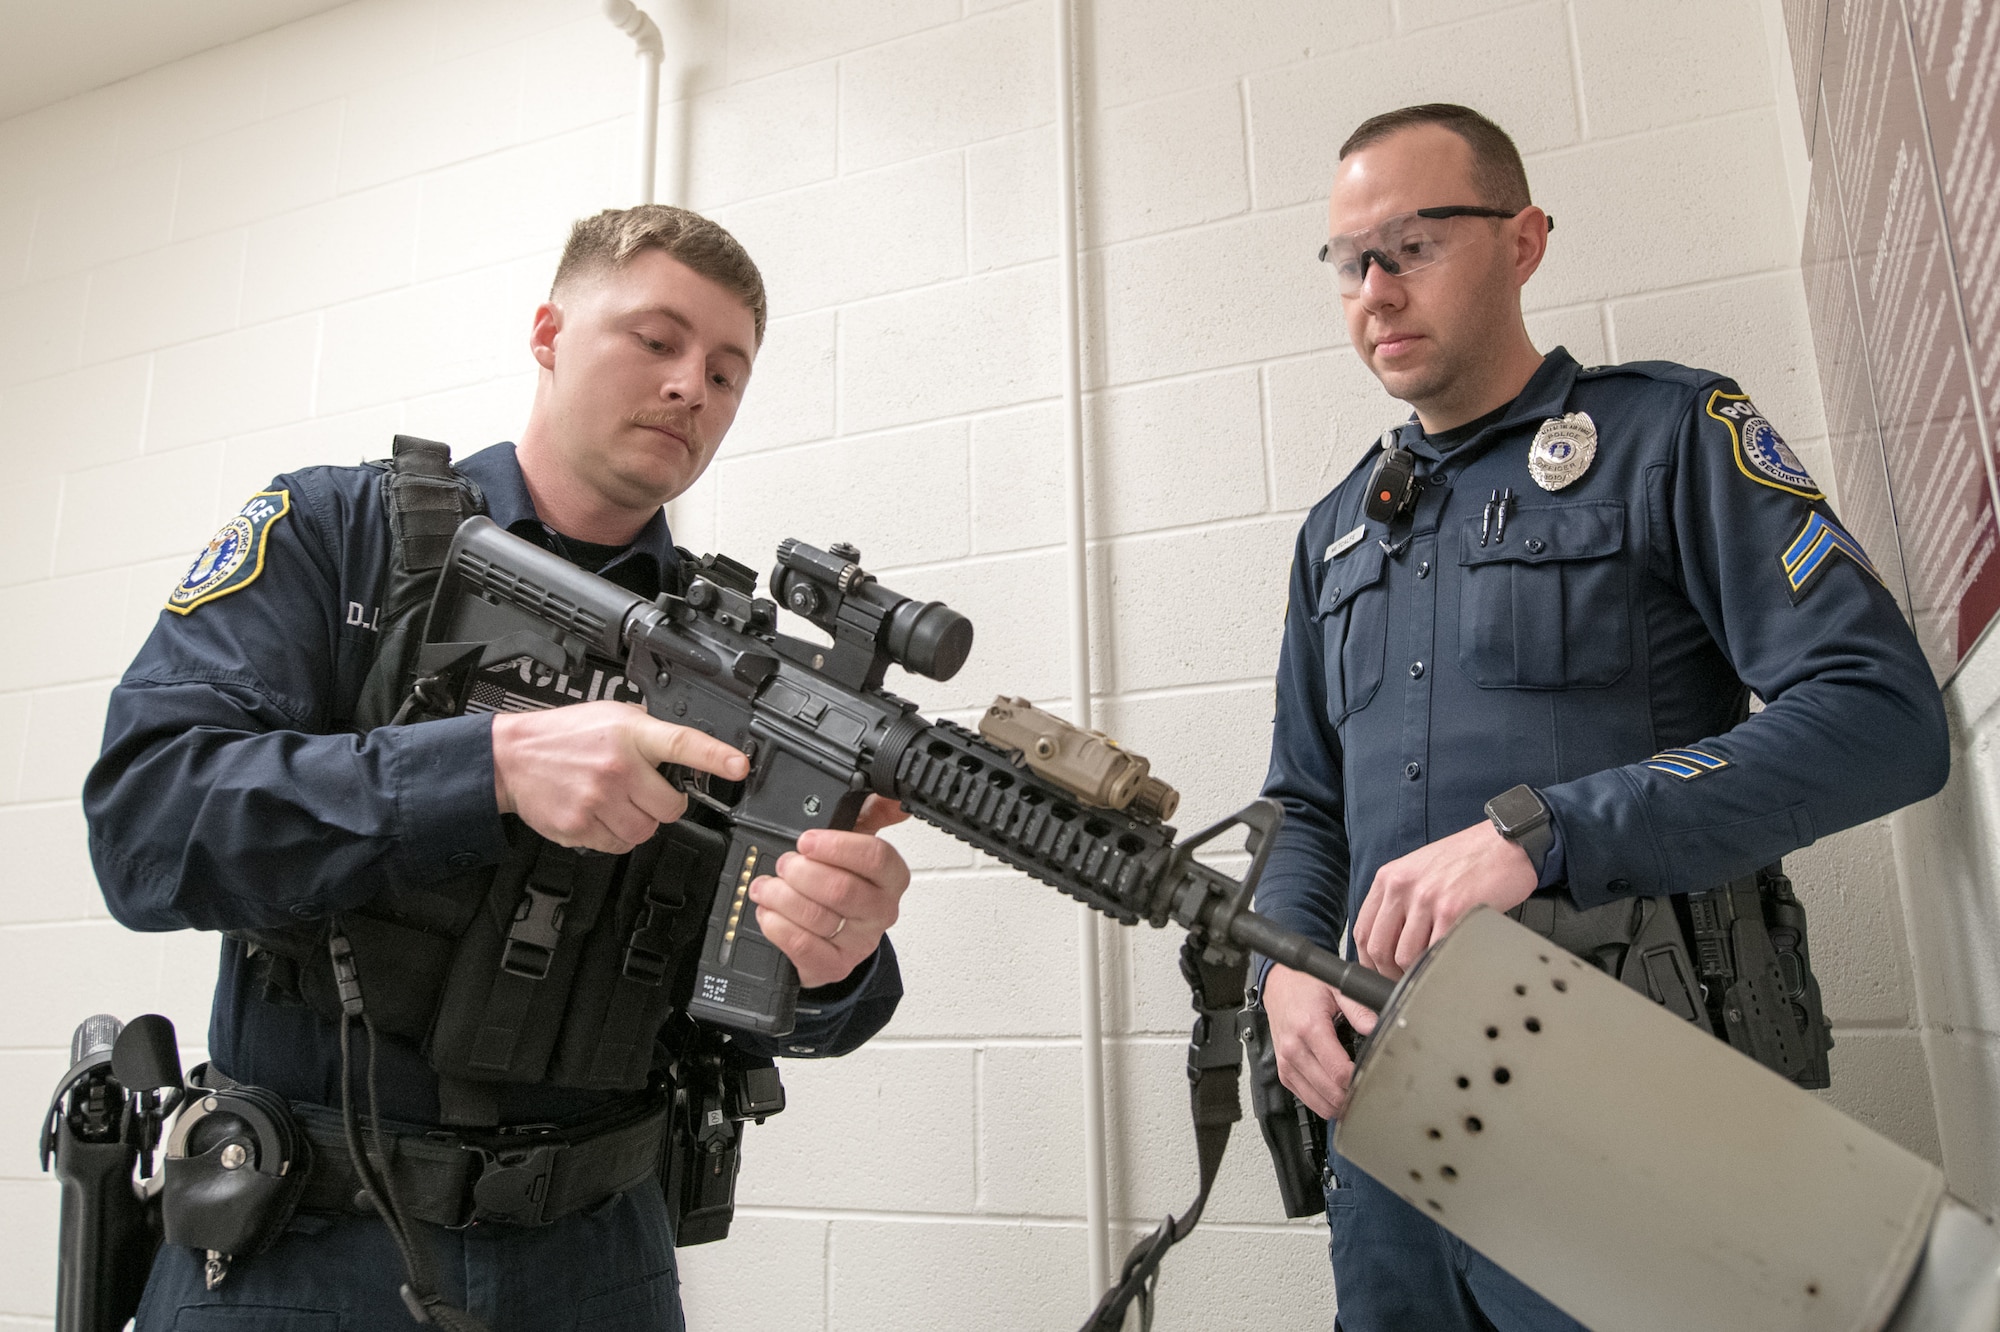 Officer Dillon Lackus, 436th Security Forces Squadron Department of the Air Force police officer, loads his service rifle under the supervision of Cpl. Ryan Metcalfe, also 436th SFS DAF police, Feb. 13, 2020, at Dover Air Force Base, Delaware. Before starting their shifts, all DAF police officers and security forces Airmen must properly load their weapons and test their stun guns while being supervised by a clearing barrel attendant. (U.S. Air Force photo by Mauricio Campino)